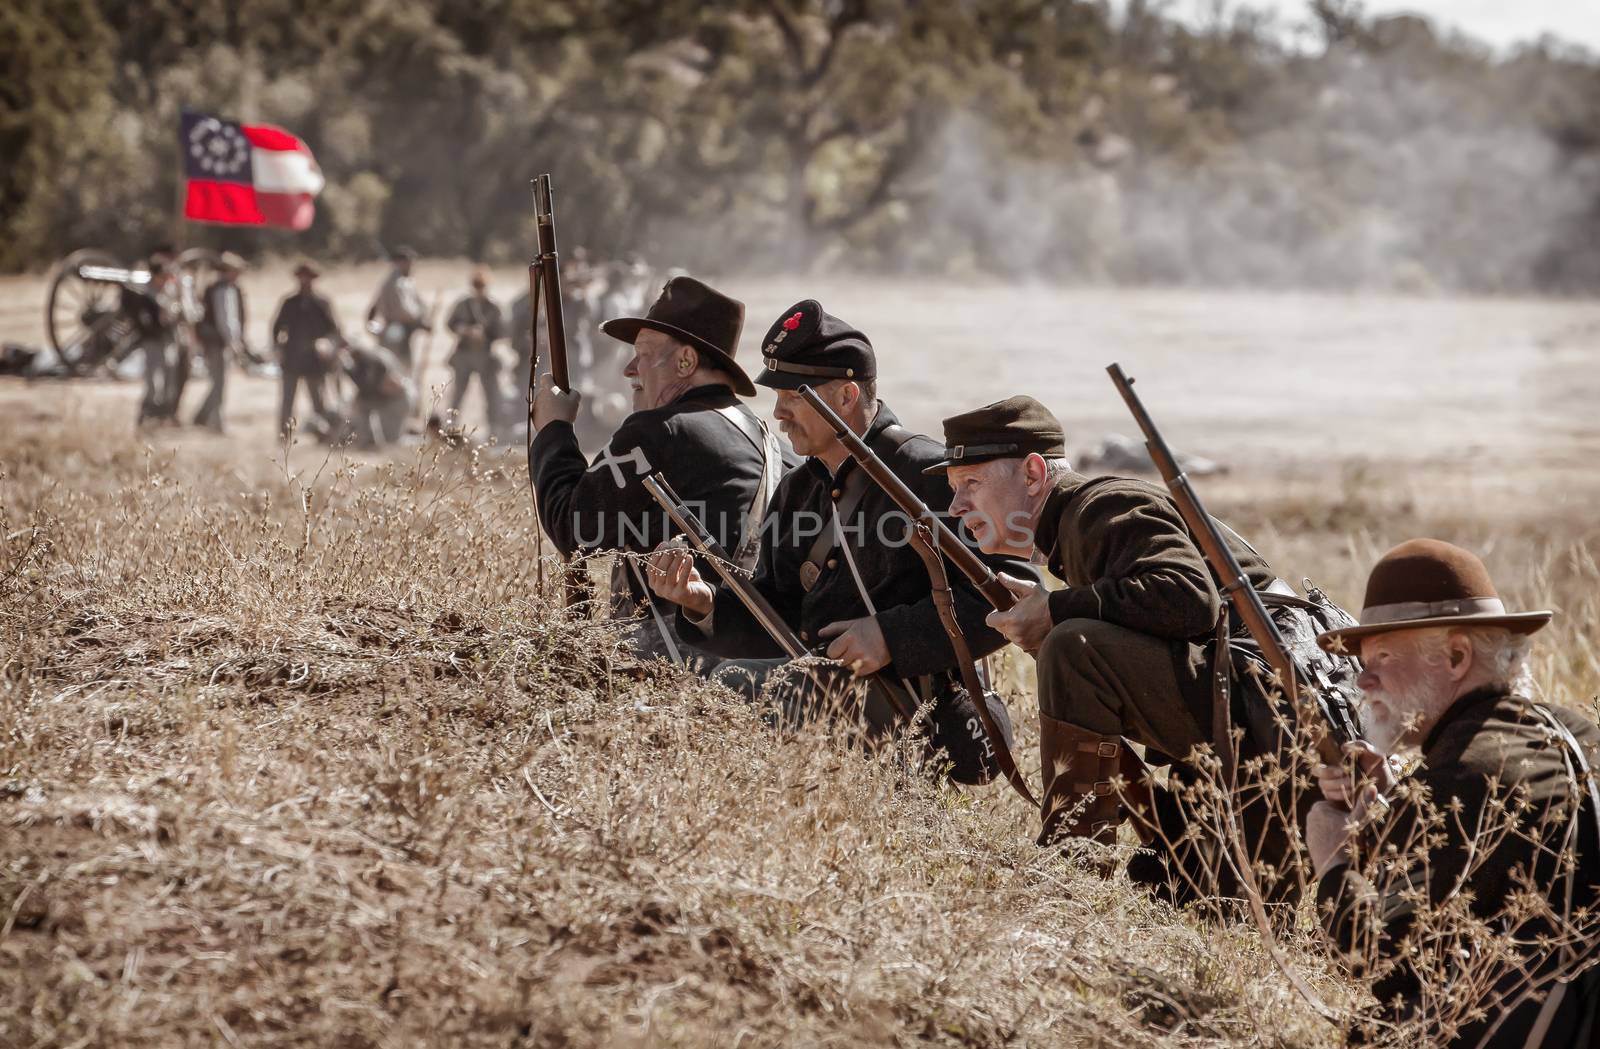 Union sharpshooters look for targets during a Civil War reenactment in Anderson, California.
Photo taken on: September 27th, 2014